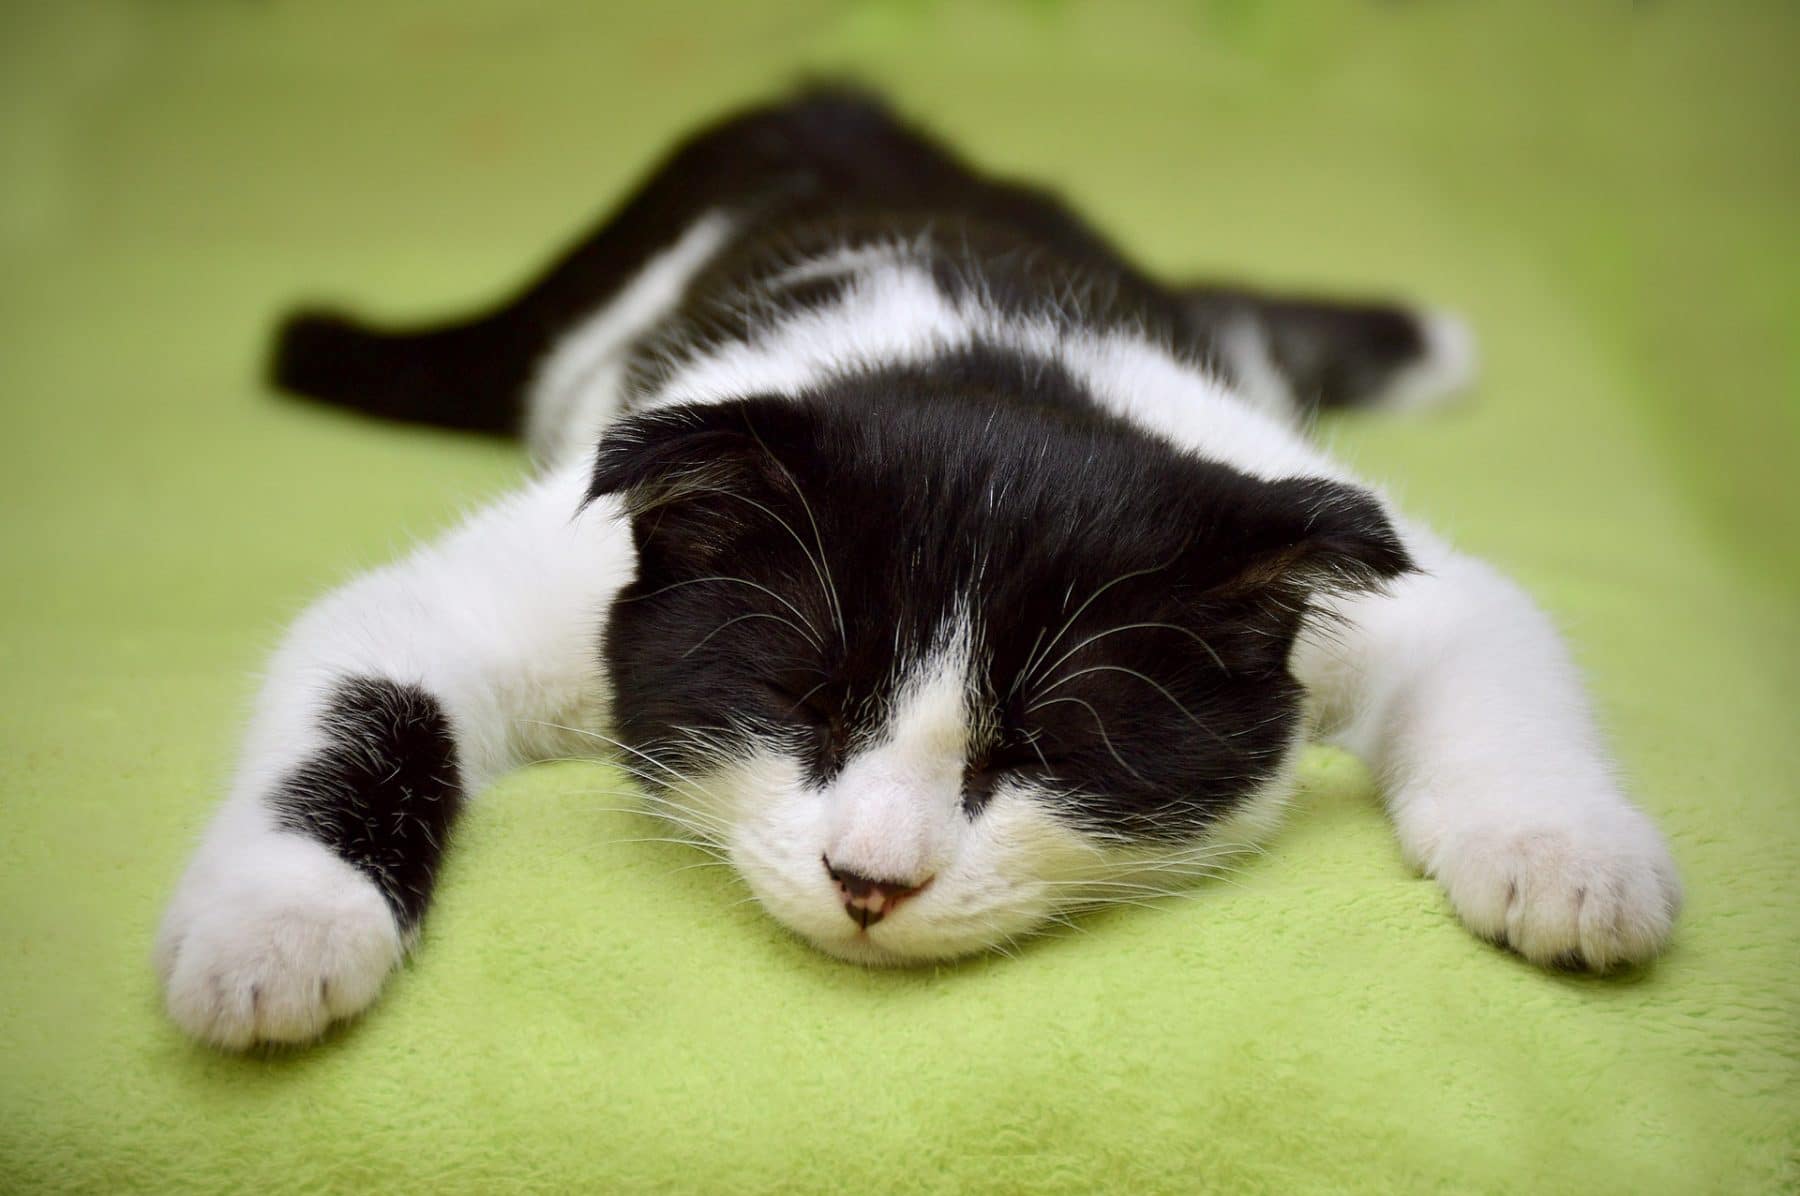 Least Active Cat Breeds: 11 Cats With More Chill Than Chase